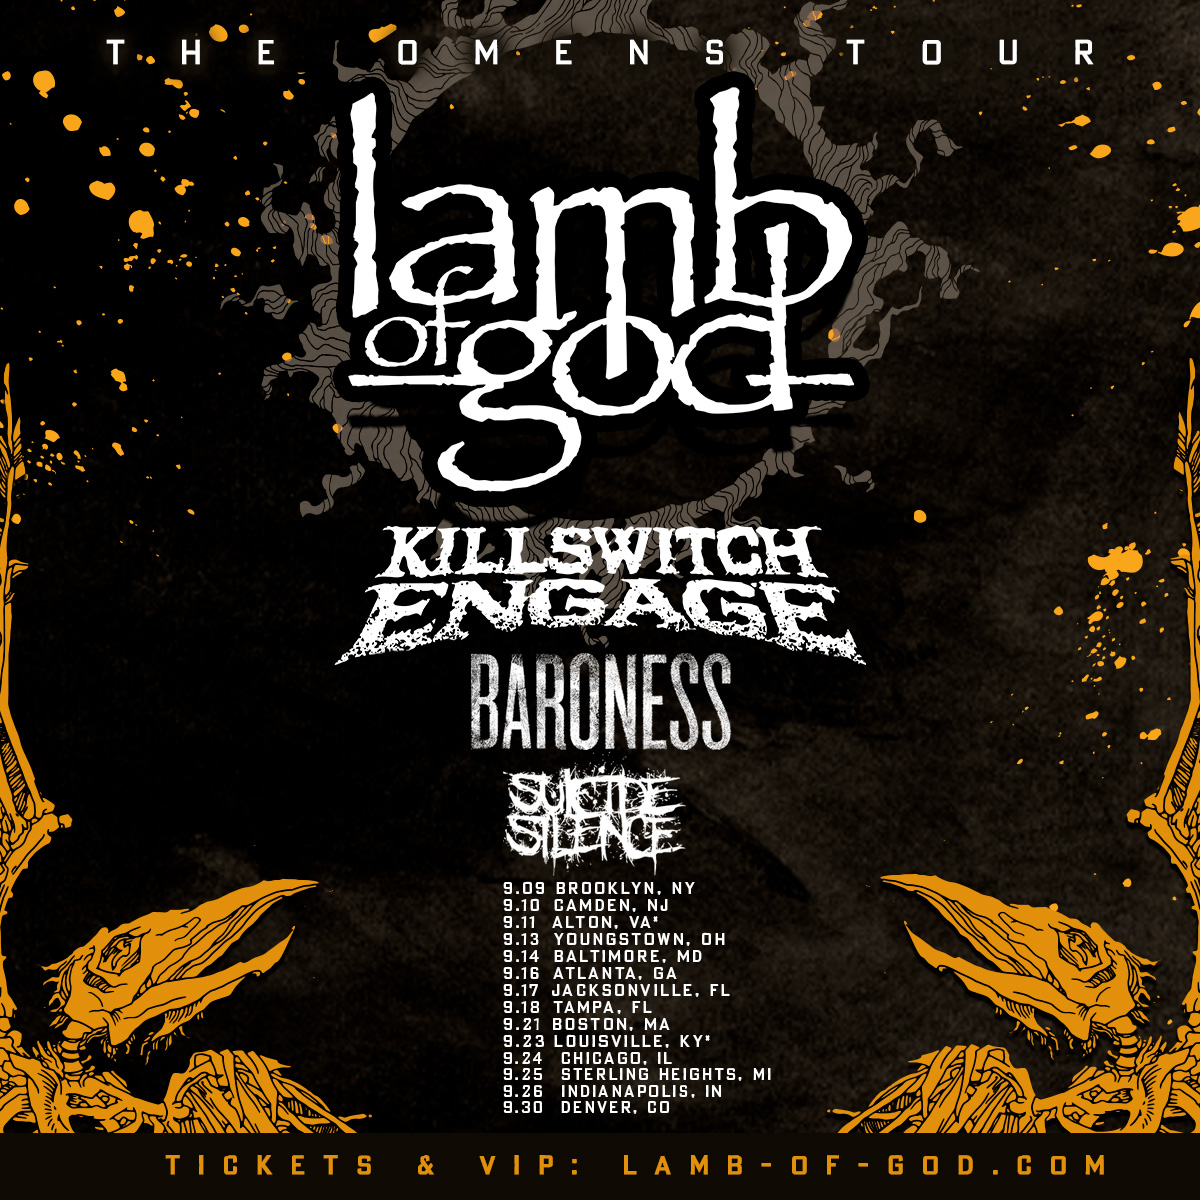 US Tour with Lamb Of God & Killswitch Engage | September 2022